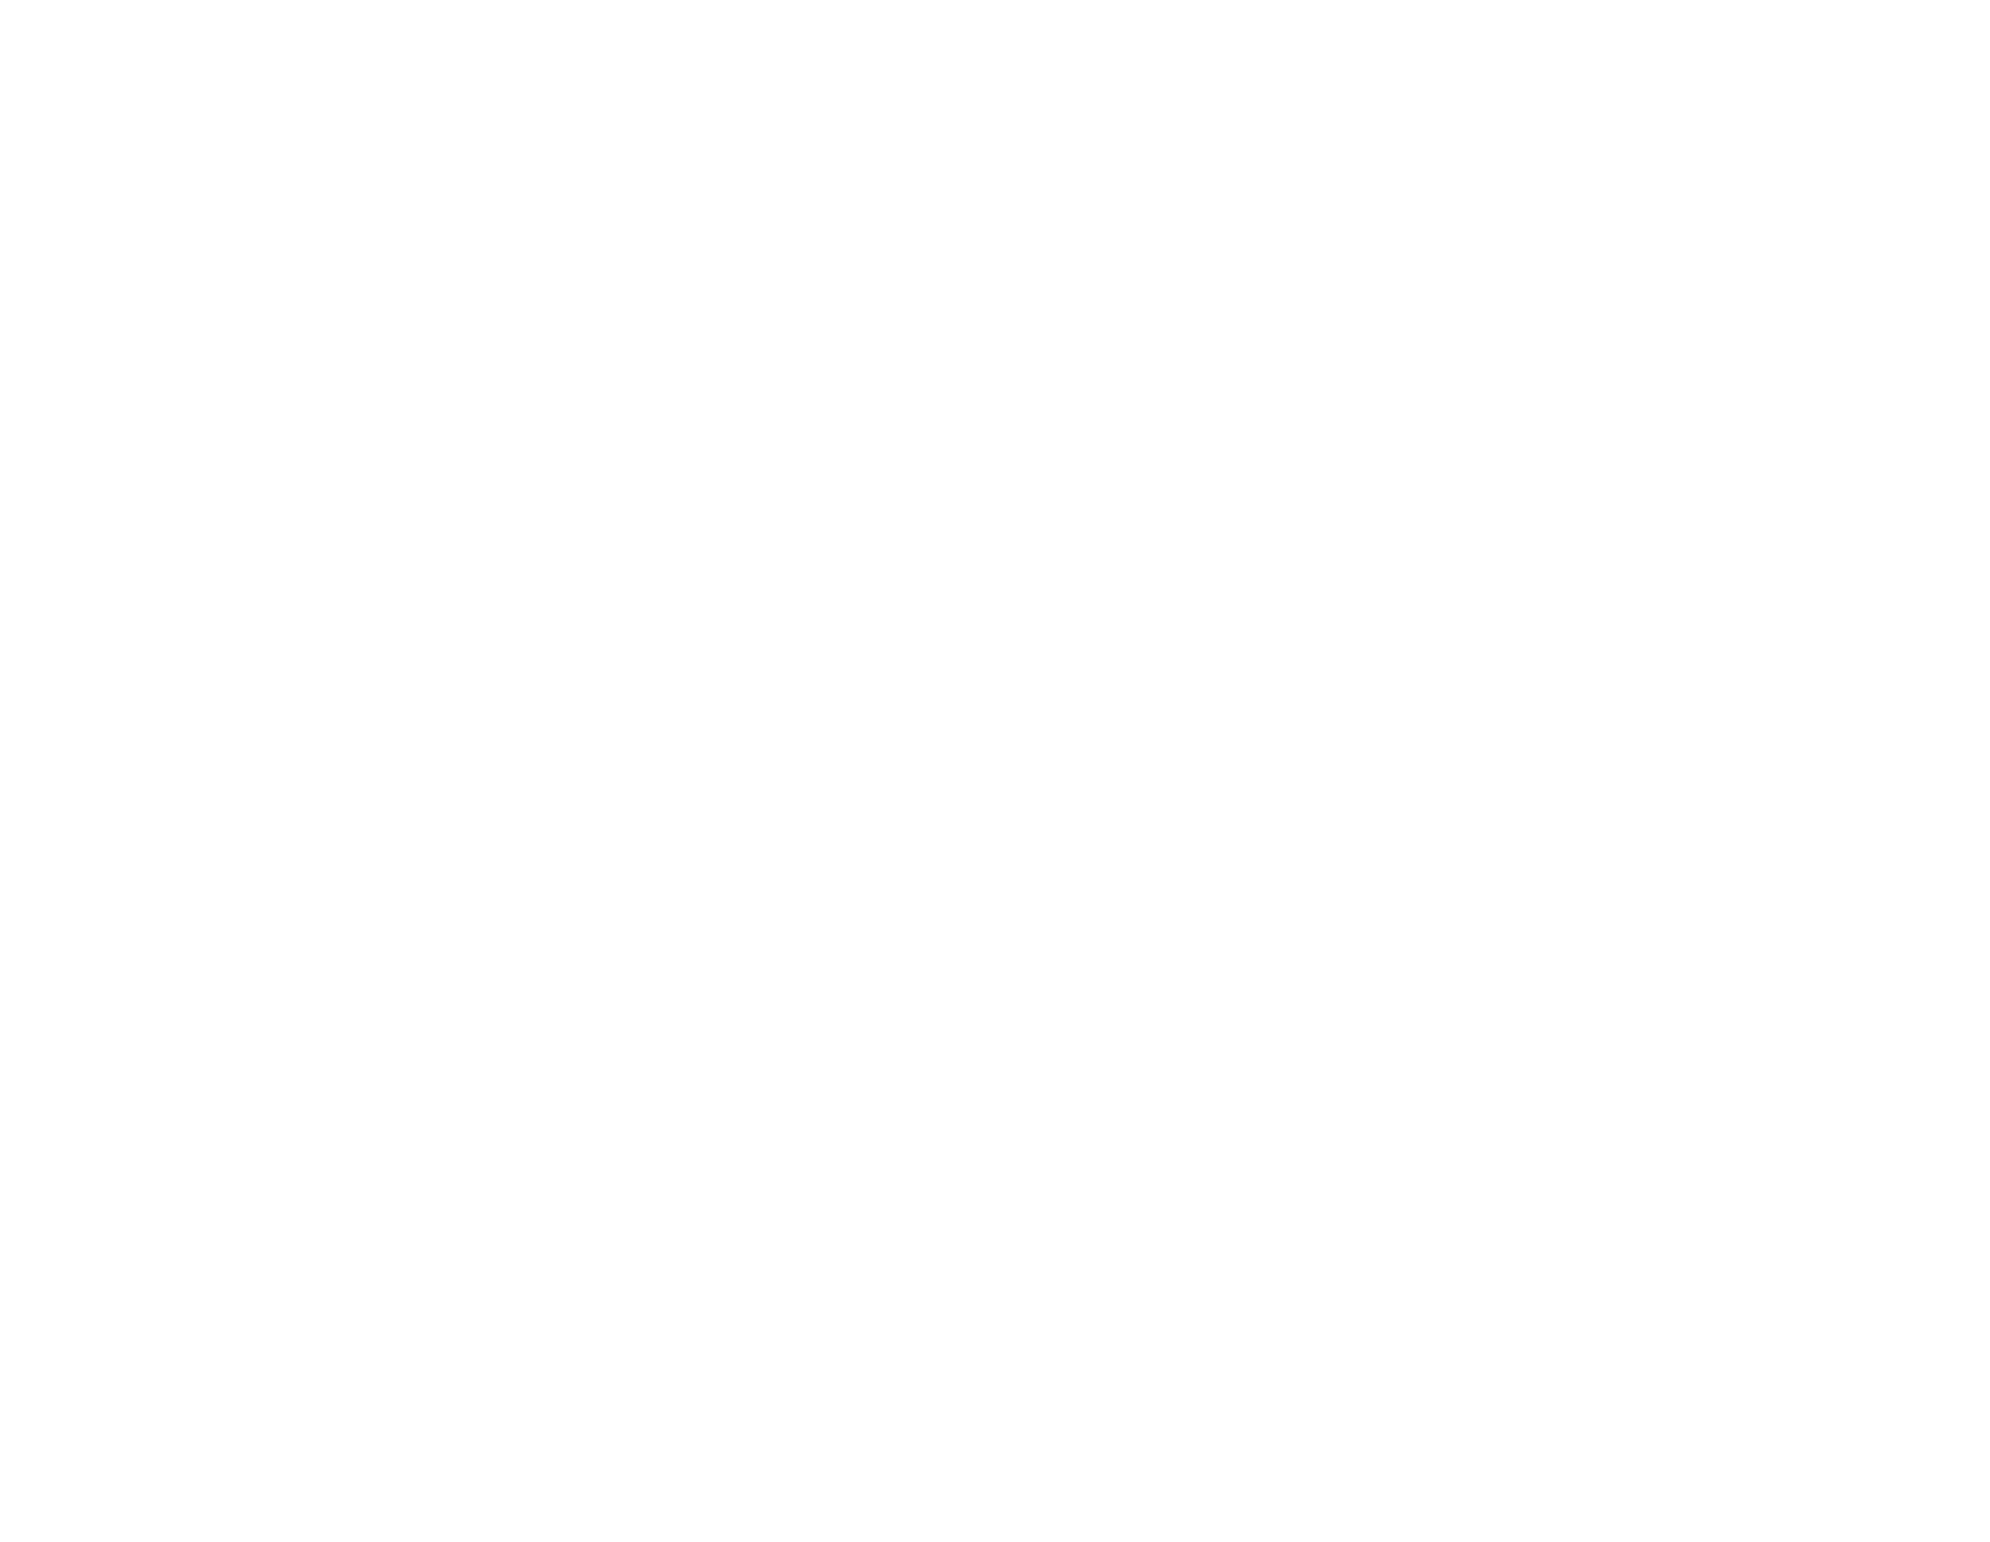 Two Mules Cantina